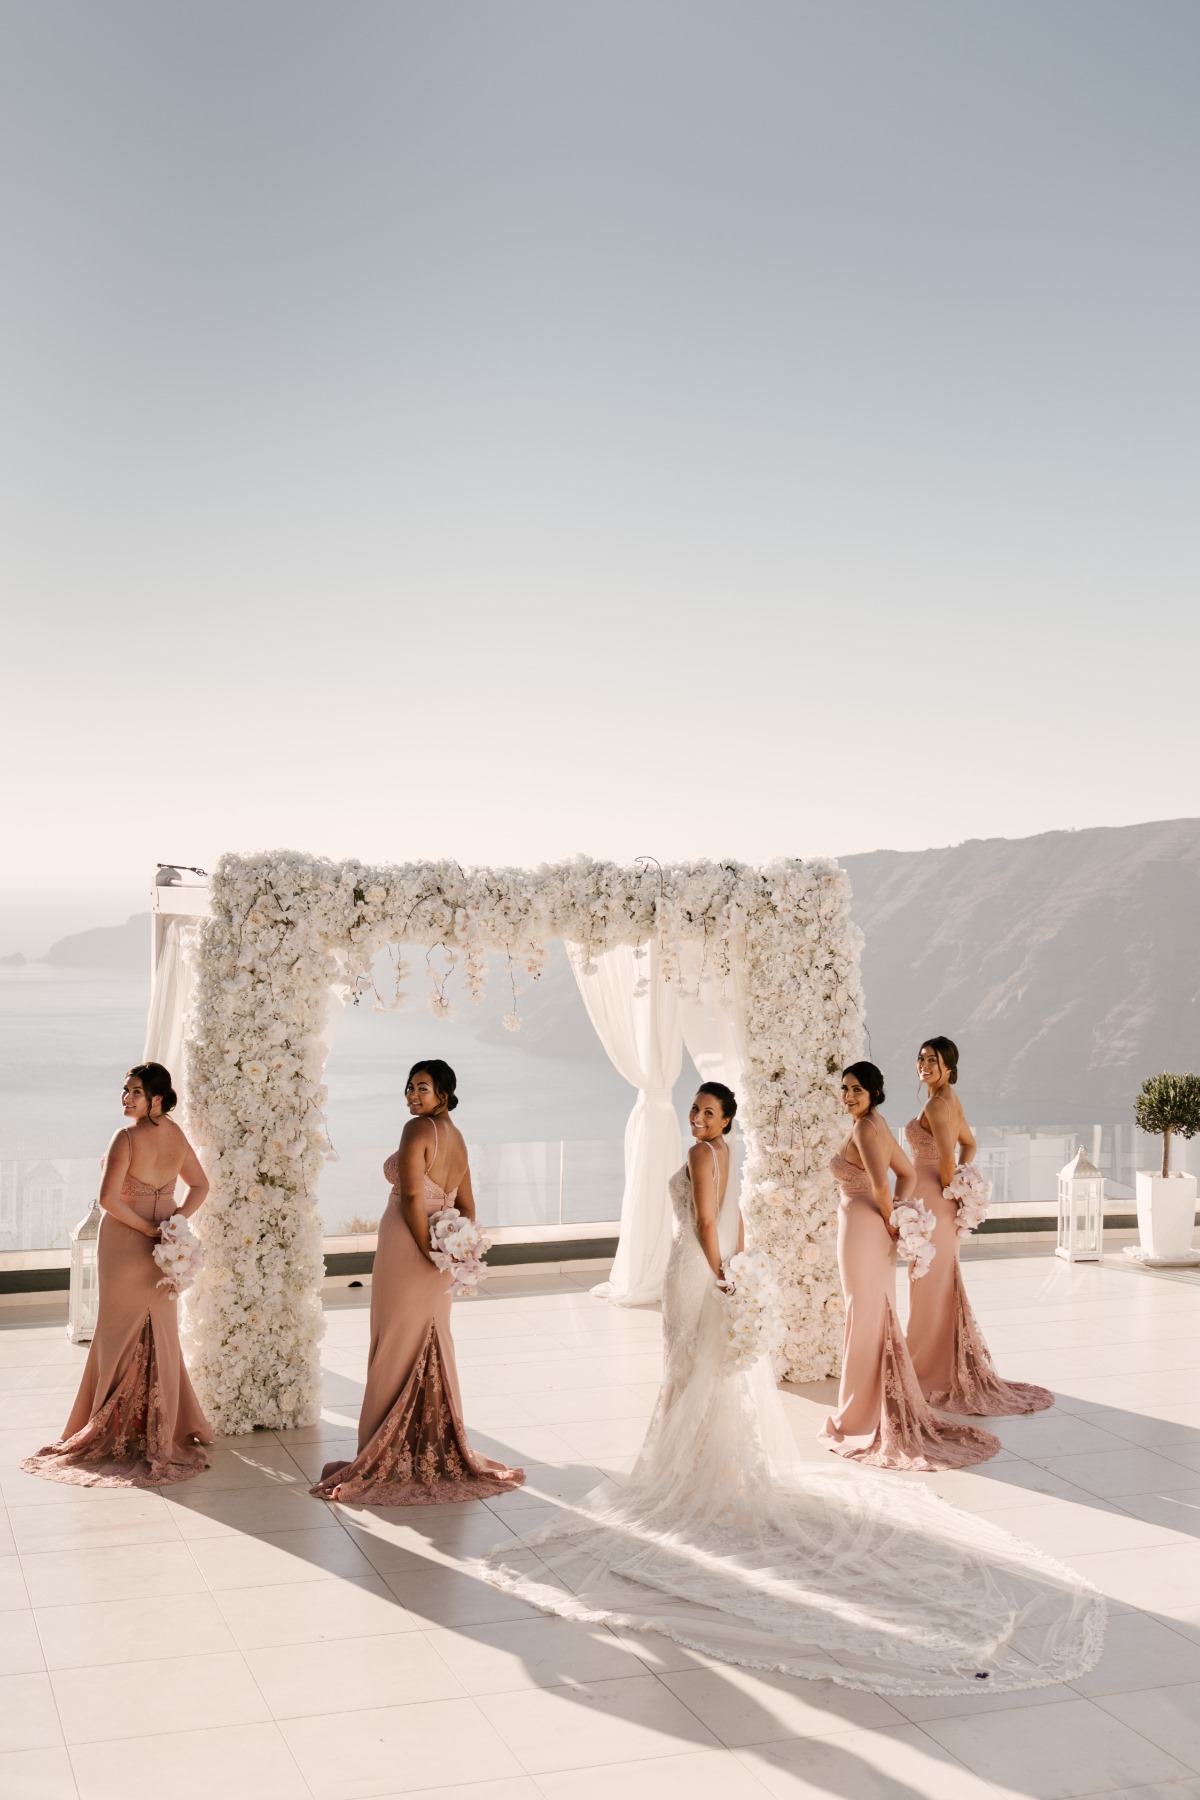 Fairytale Wedding In Santorini Planned During A Global Pandemic